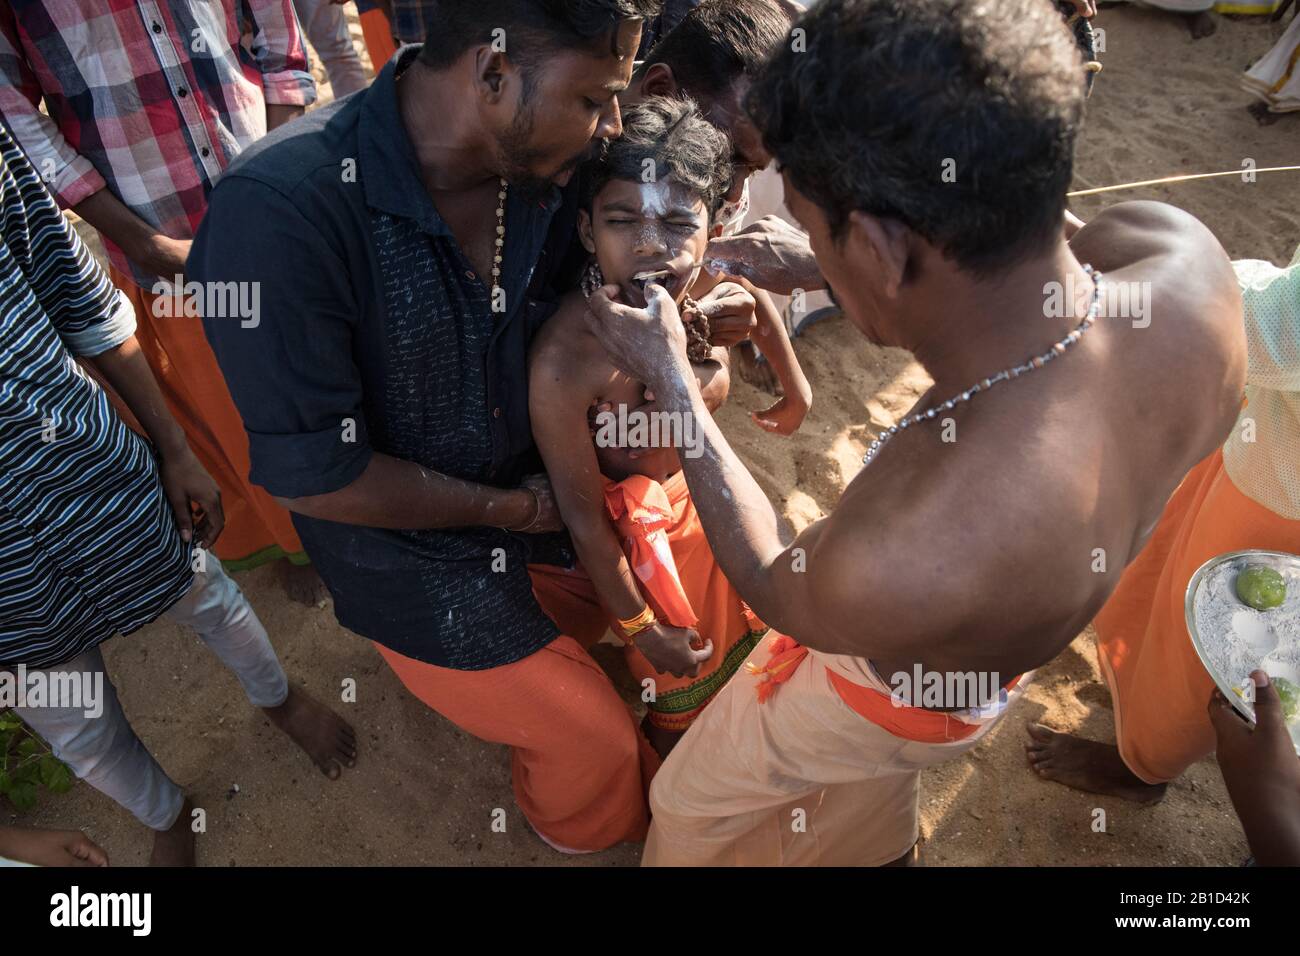 Devotees having a spear piercing in his mouth (Kavadi Aattam) as an act of devotion during Thaipooyam, or Thaipoosam, Festival in Kedakulam, Kerala. Stock Photo